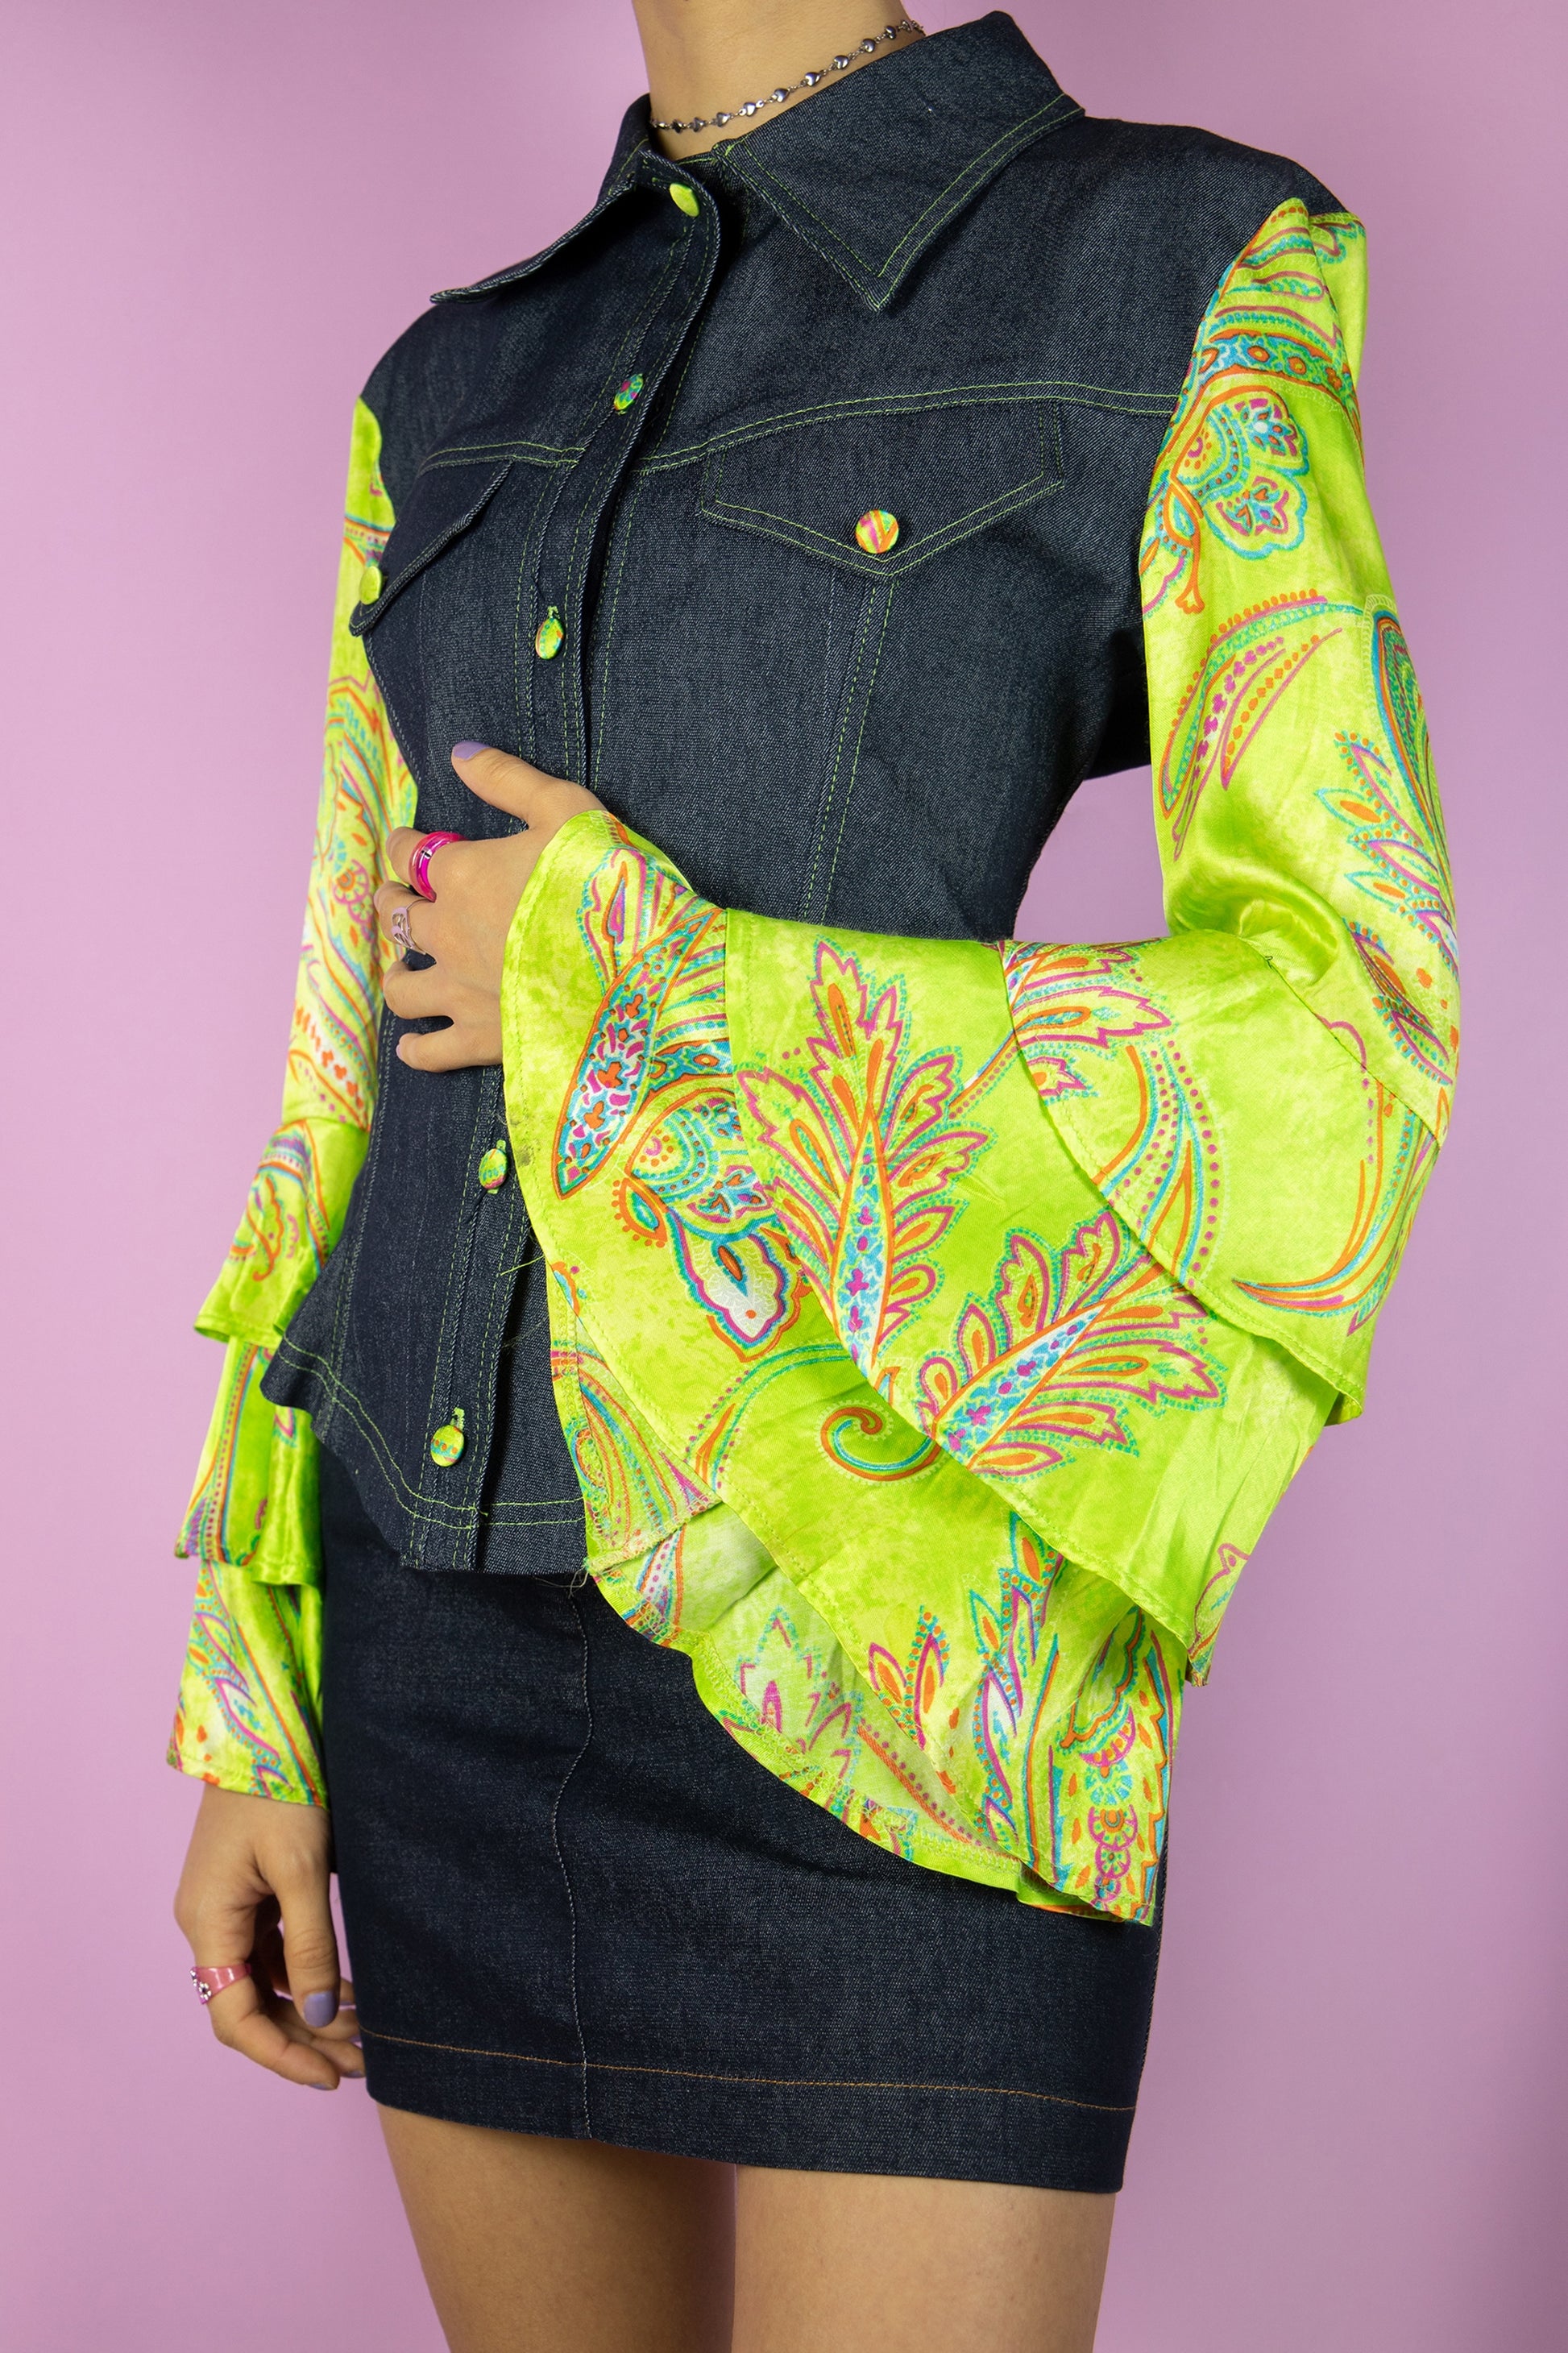 The Vintage Y2K Bell Sleeve Denim Jacket is a dark denim jacket adorned with paisley floral print green bell sleeves, featuring stylish ruffles. This cyber statement jacket hails from the fashion era of the 2000s.